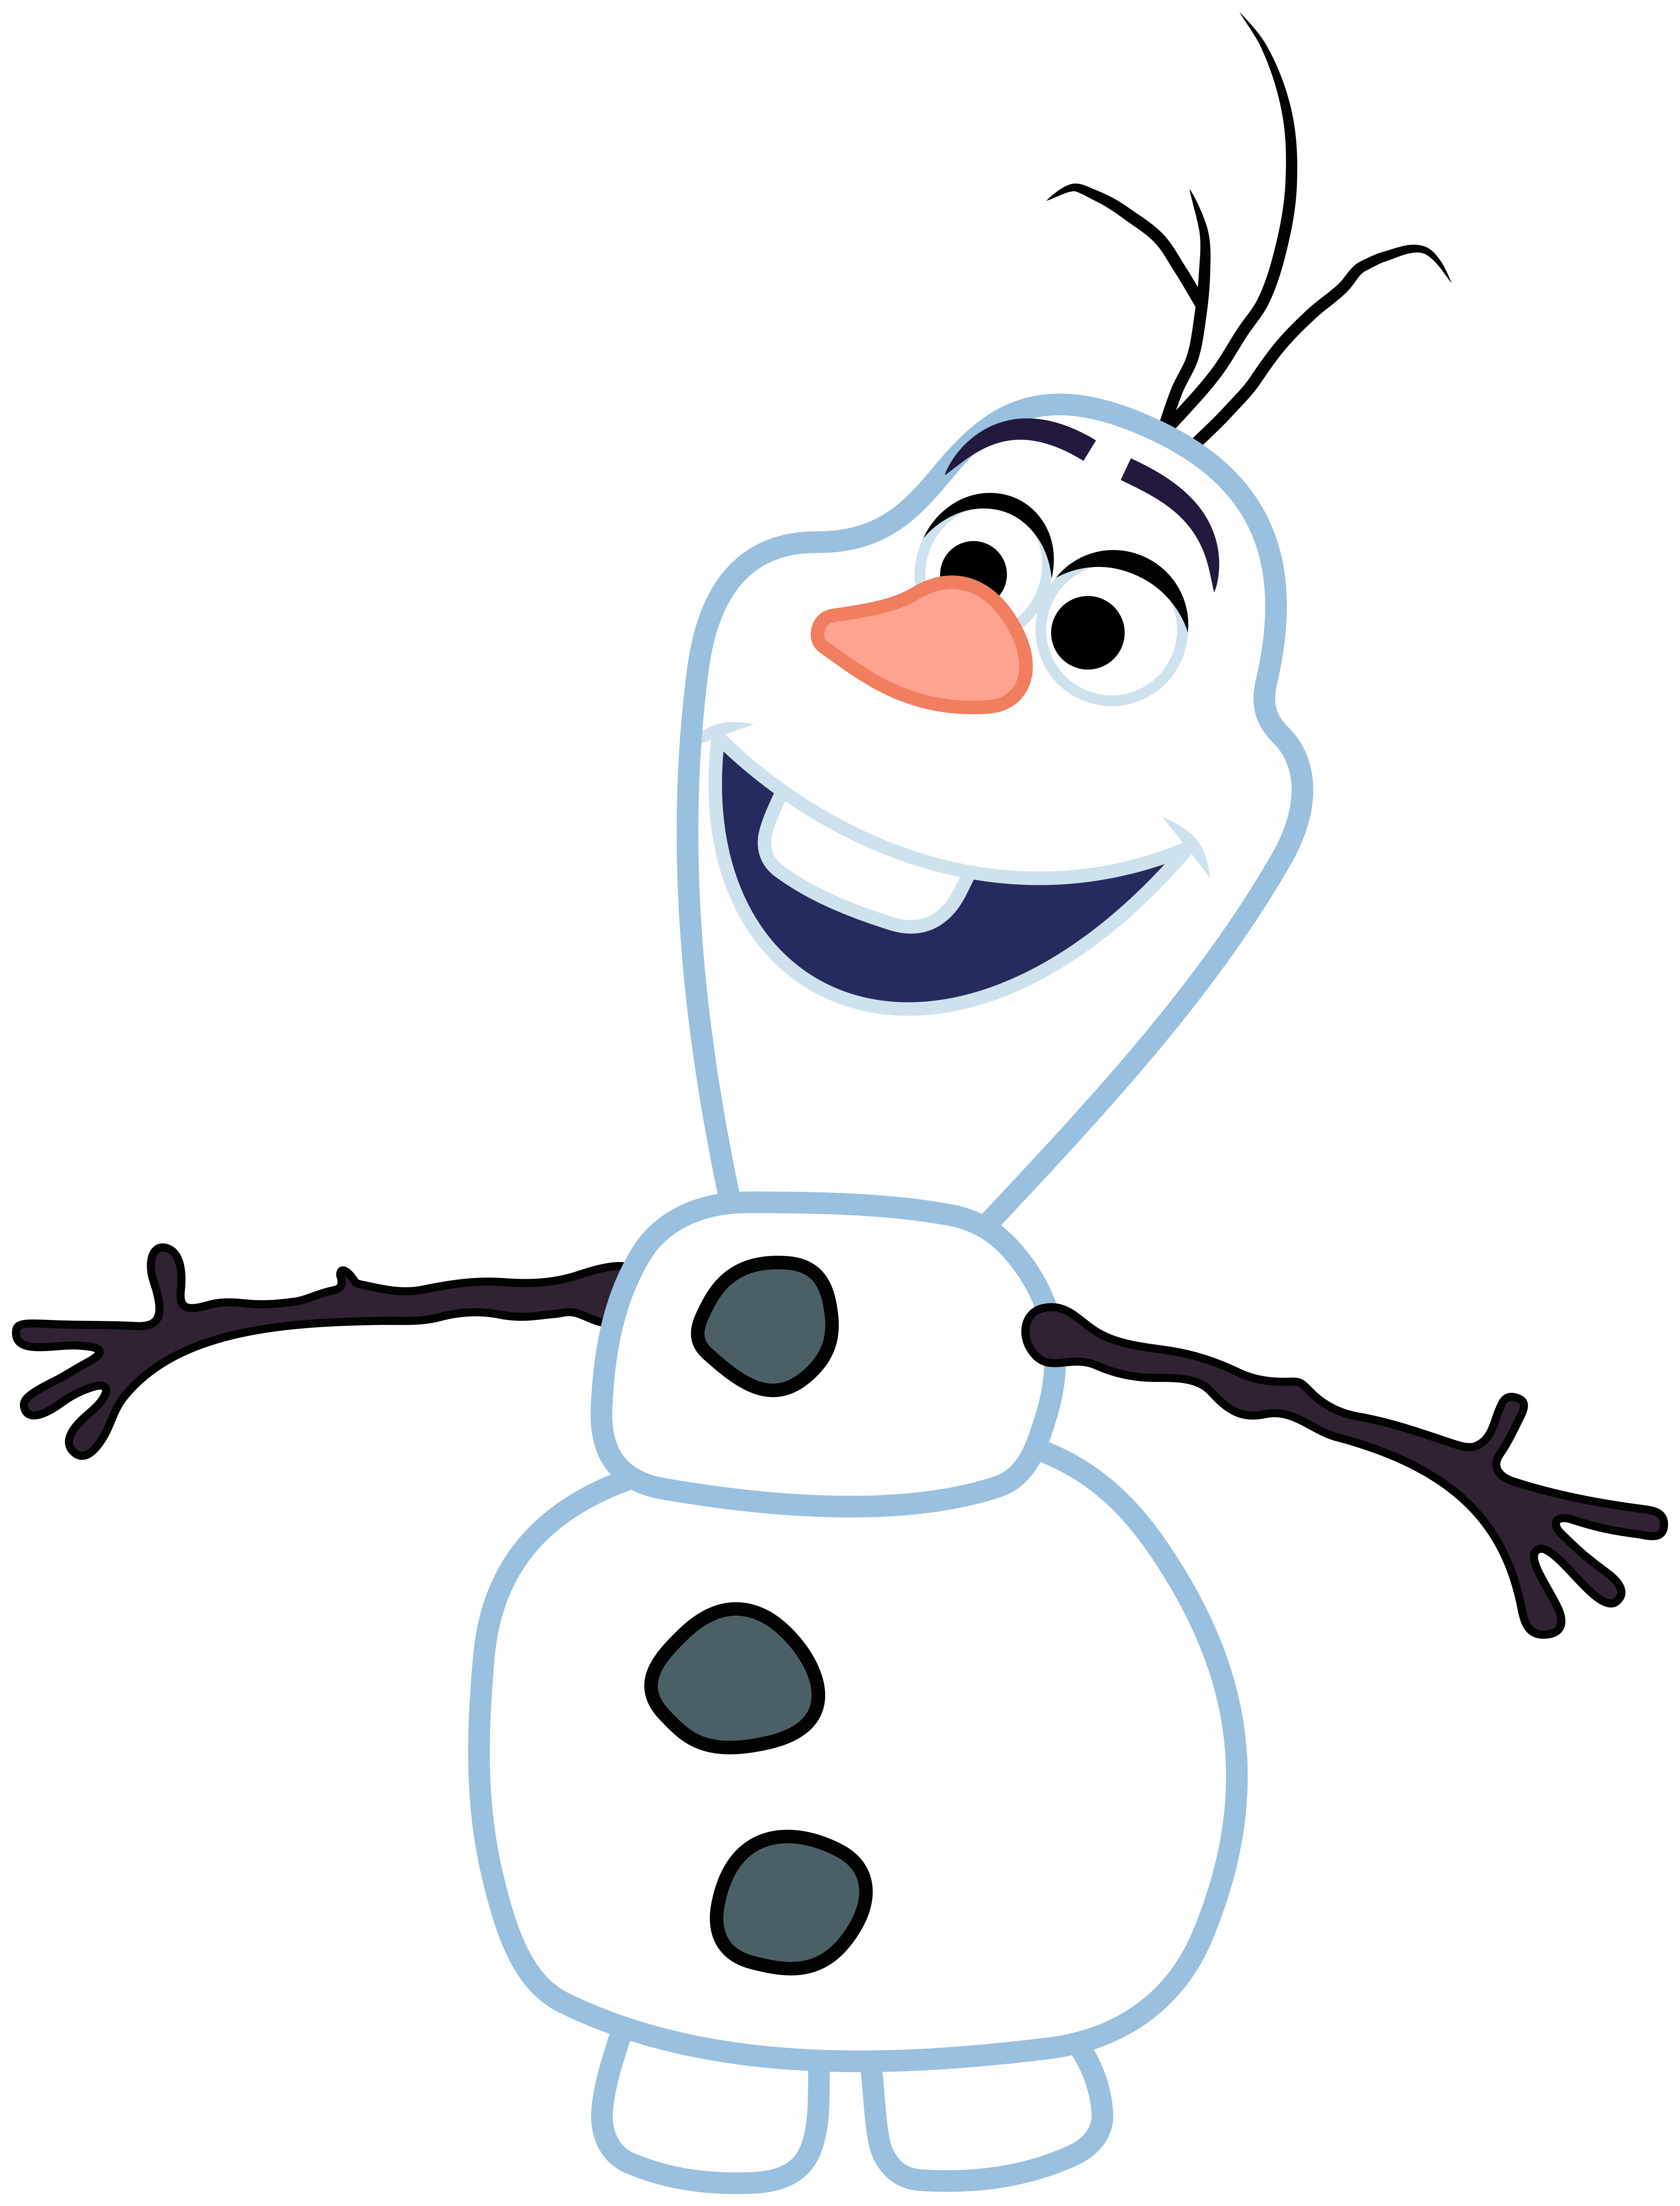 Download Hello, I'm Olaf and I like warm hugs by imageconstructor ...